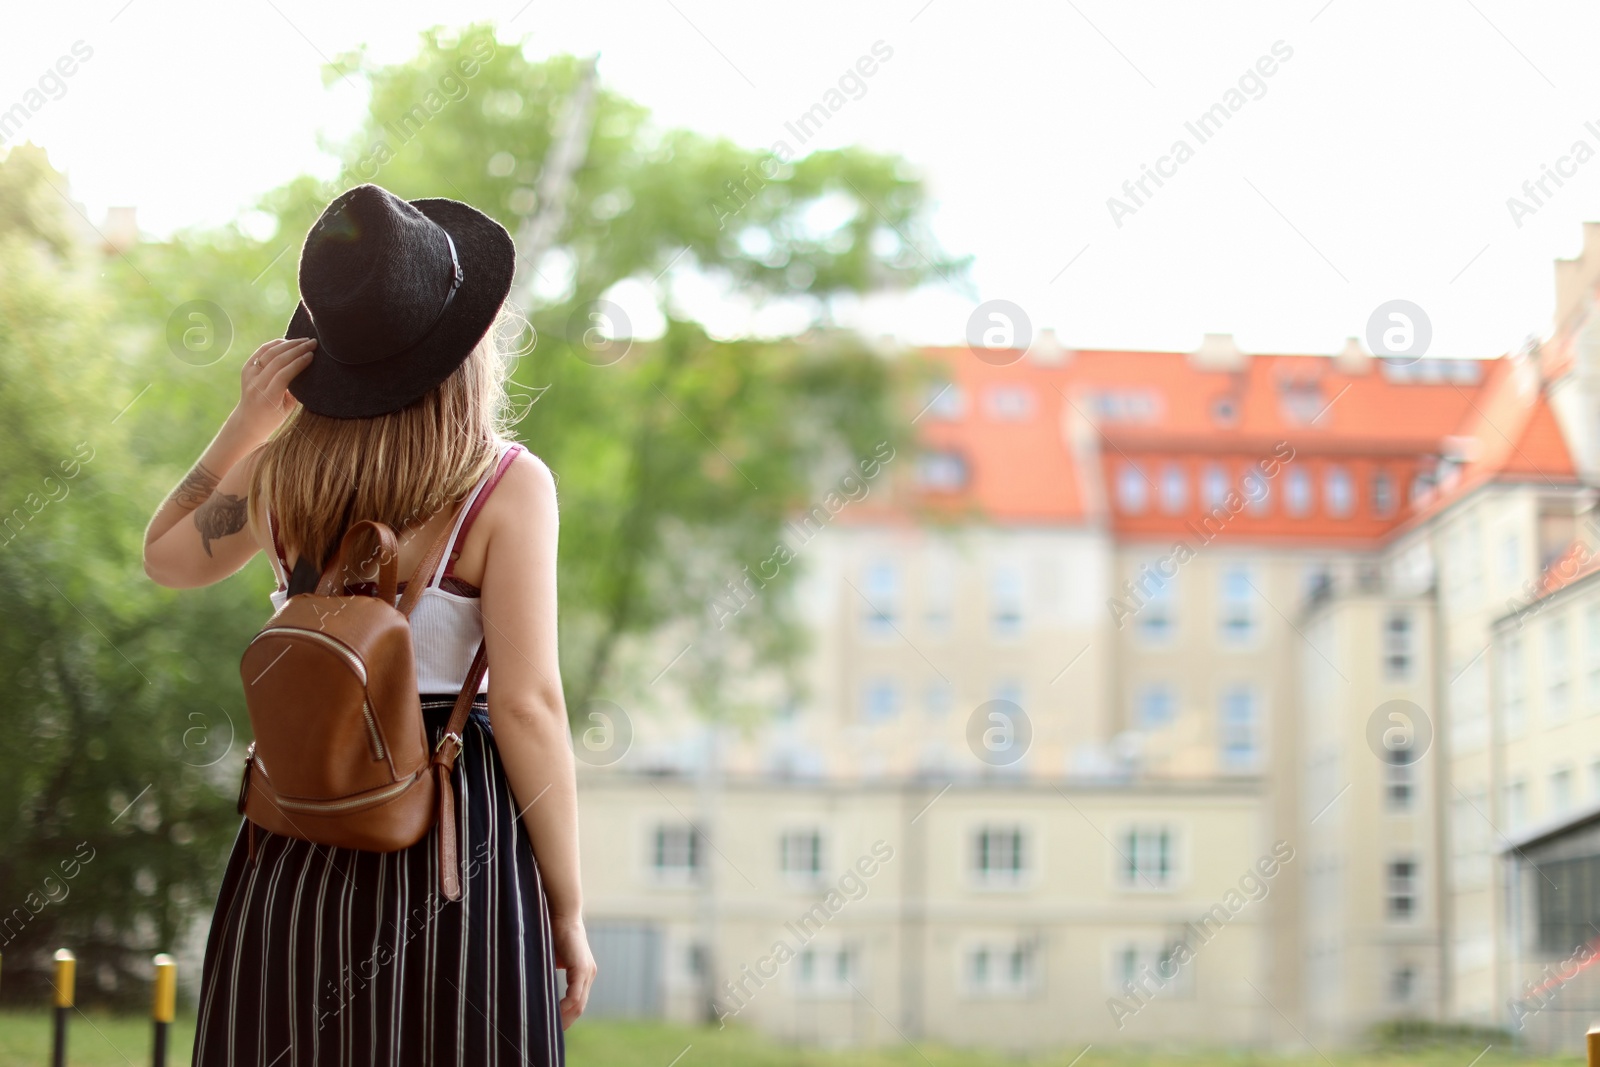 Photo of Young woman in stylish outfit on city street